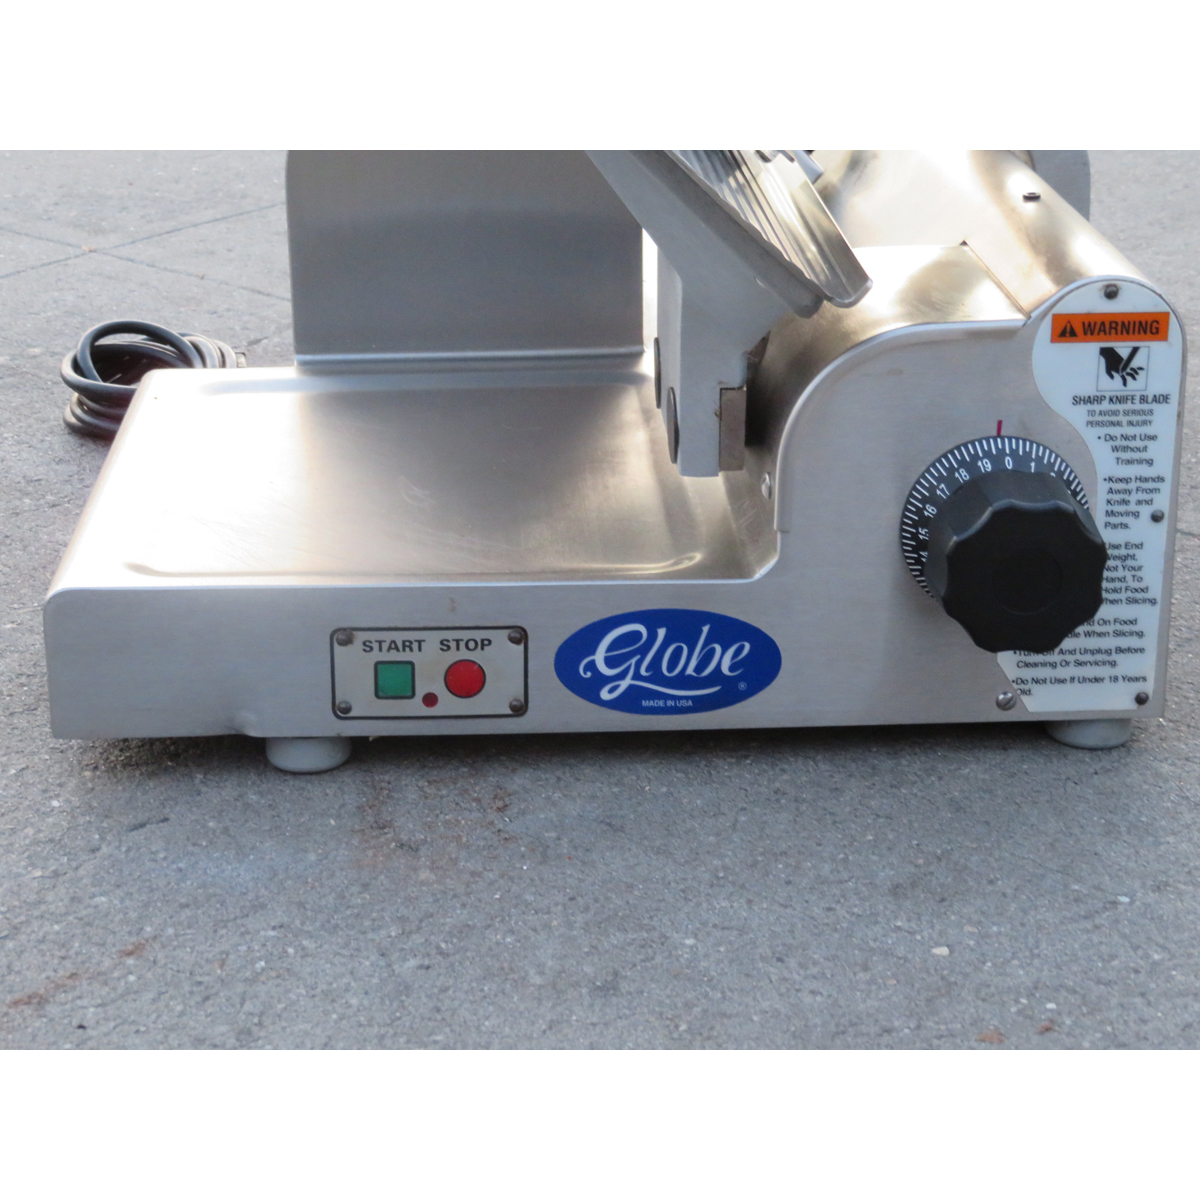 Globe 4600 Meat Slicer, Used Excellent Condition image 3